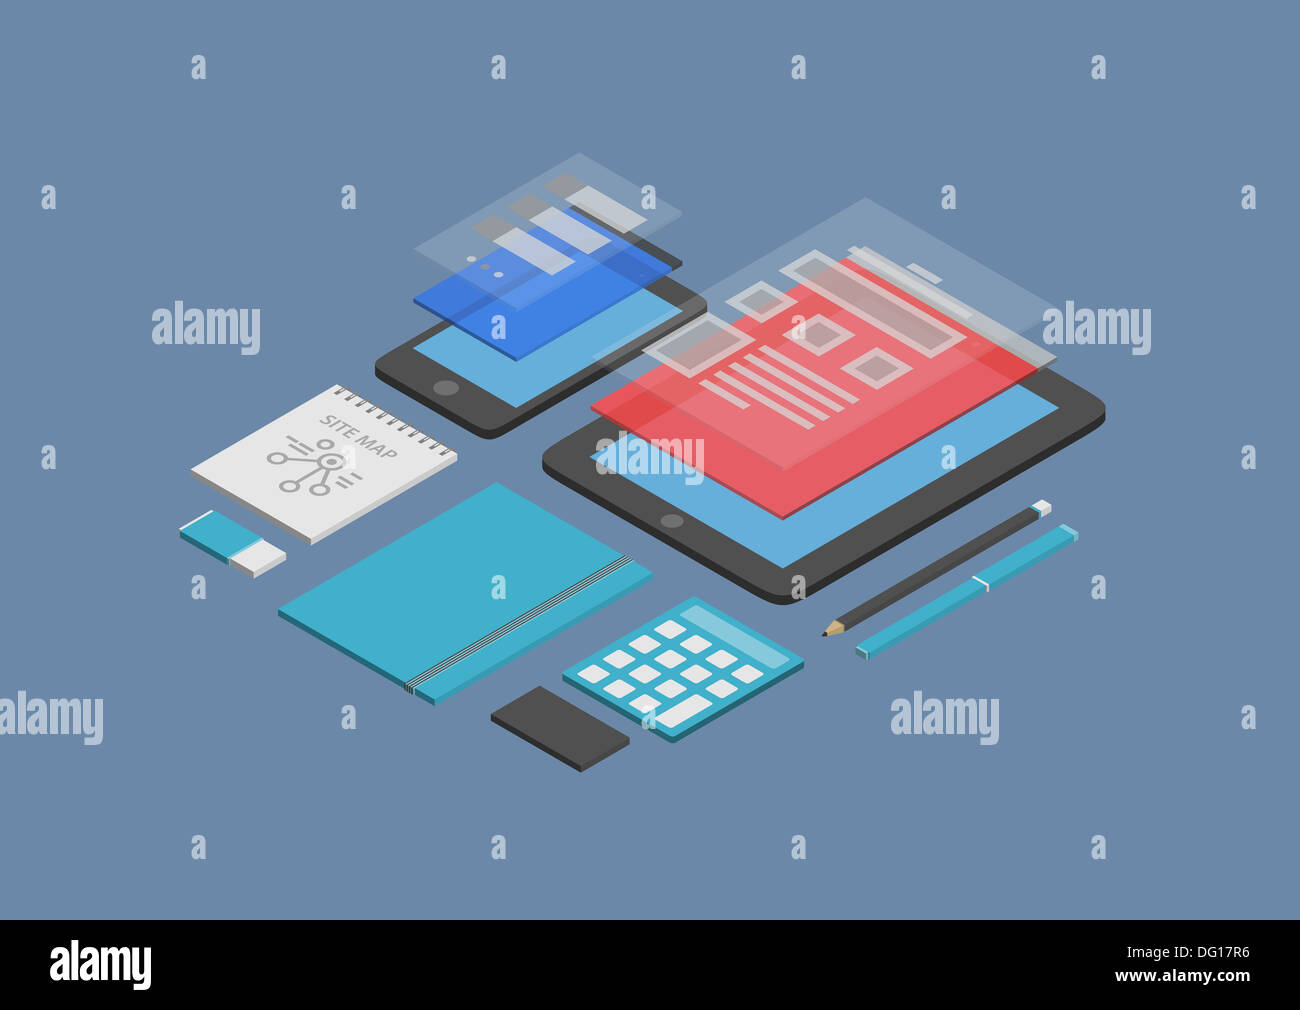 Flat design isometric vector illustration concept of mobile web design and user interface development on modern devices. Stock Photo